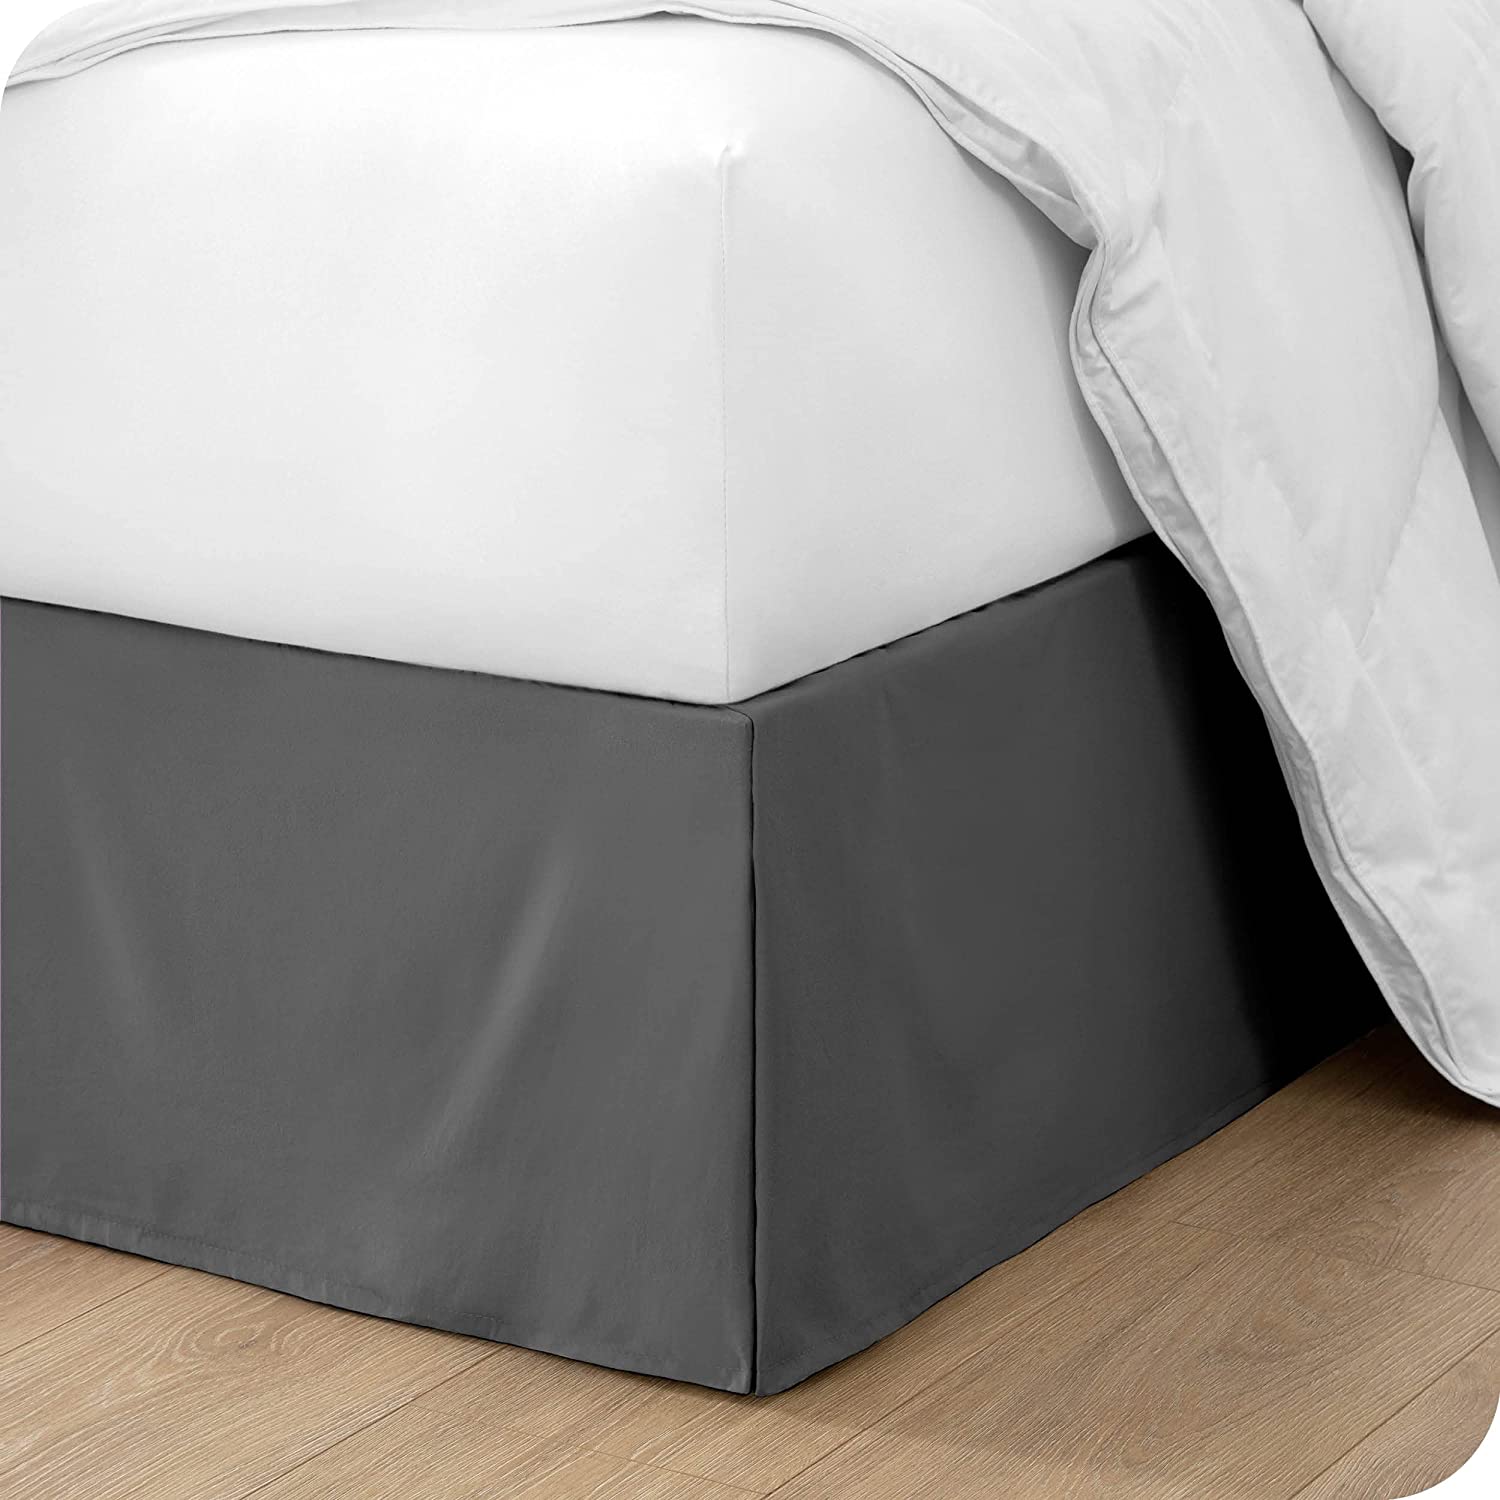 Todays Home Basic Grey Full Size 14" Drop Bed Skirt Classic Style Fade Resistant 